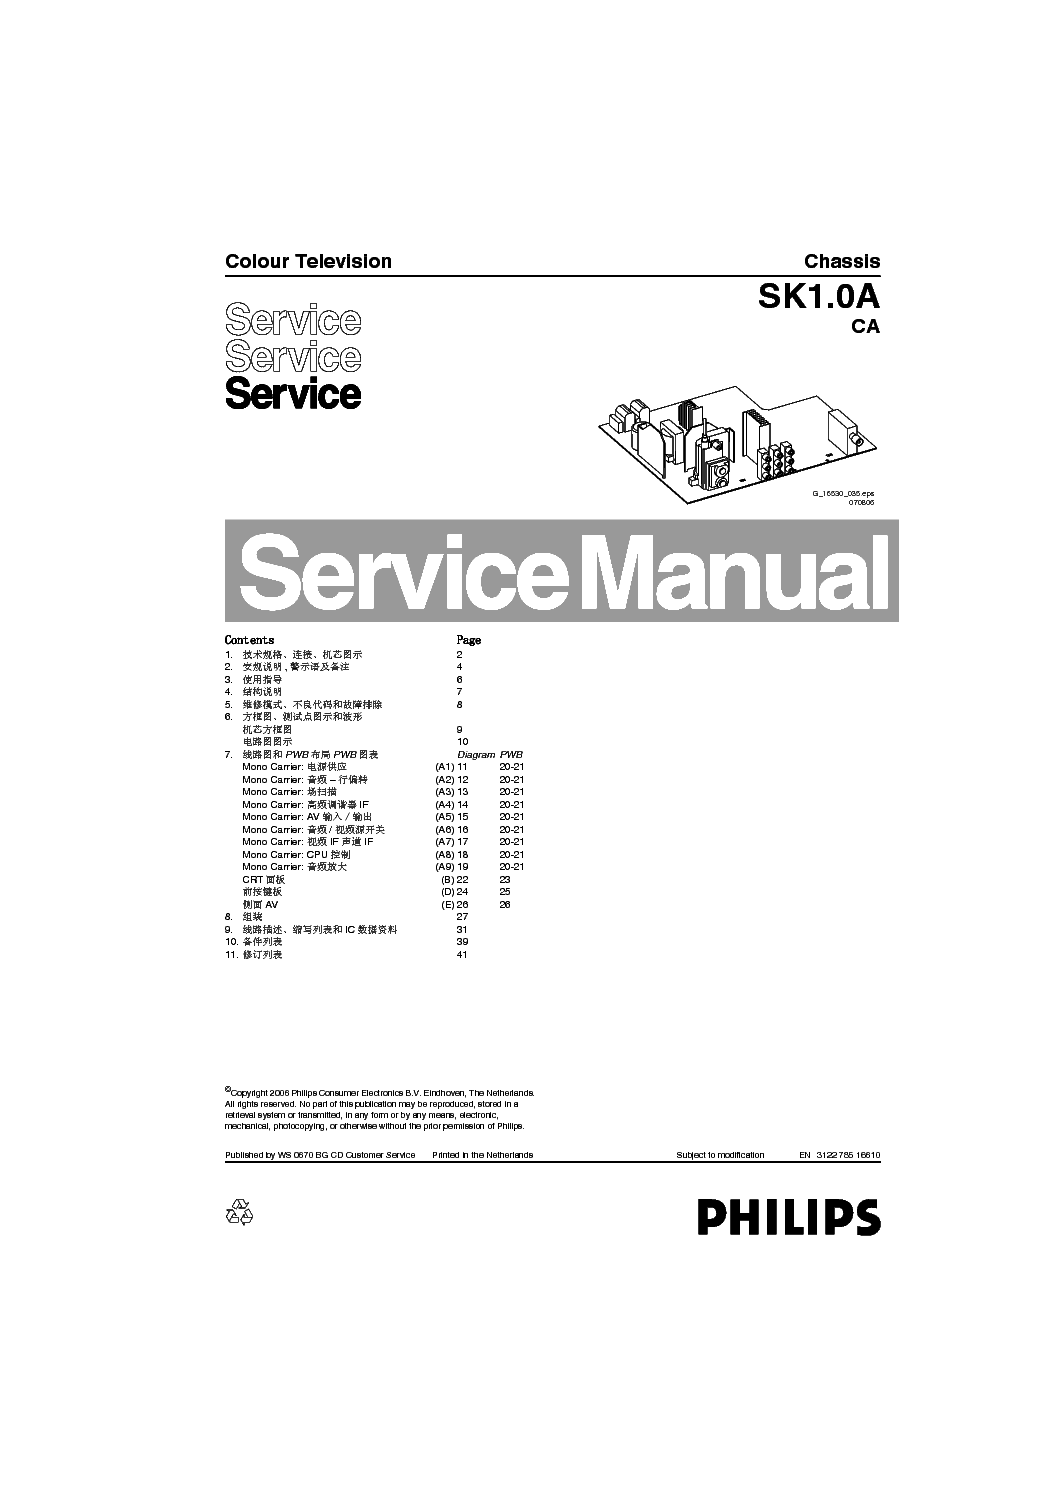 PHILIPS SK1.0A CA CHASSIS TV SM CHI service manual (1st page)